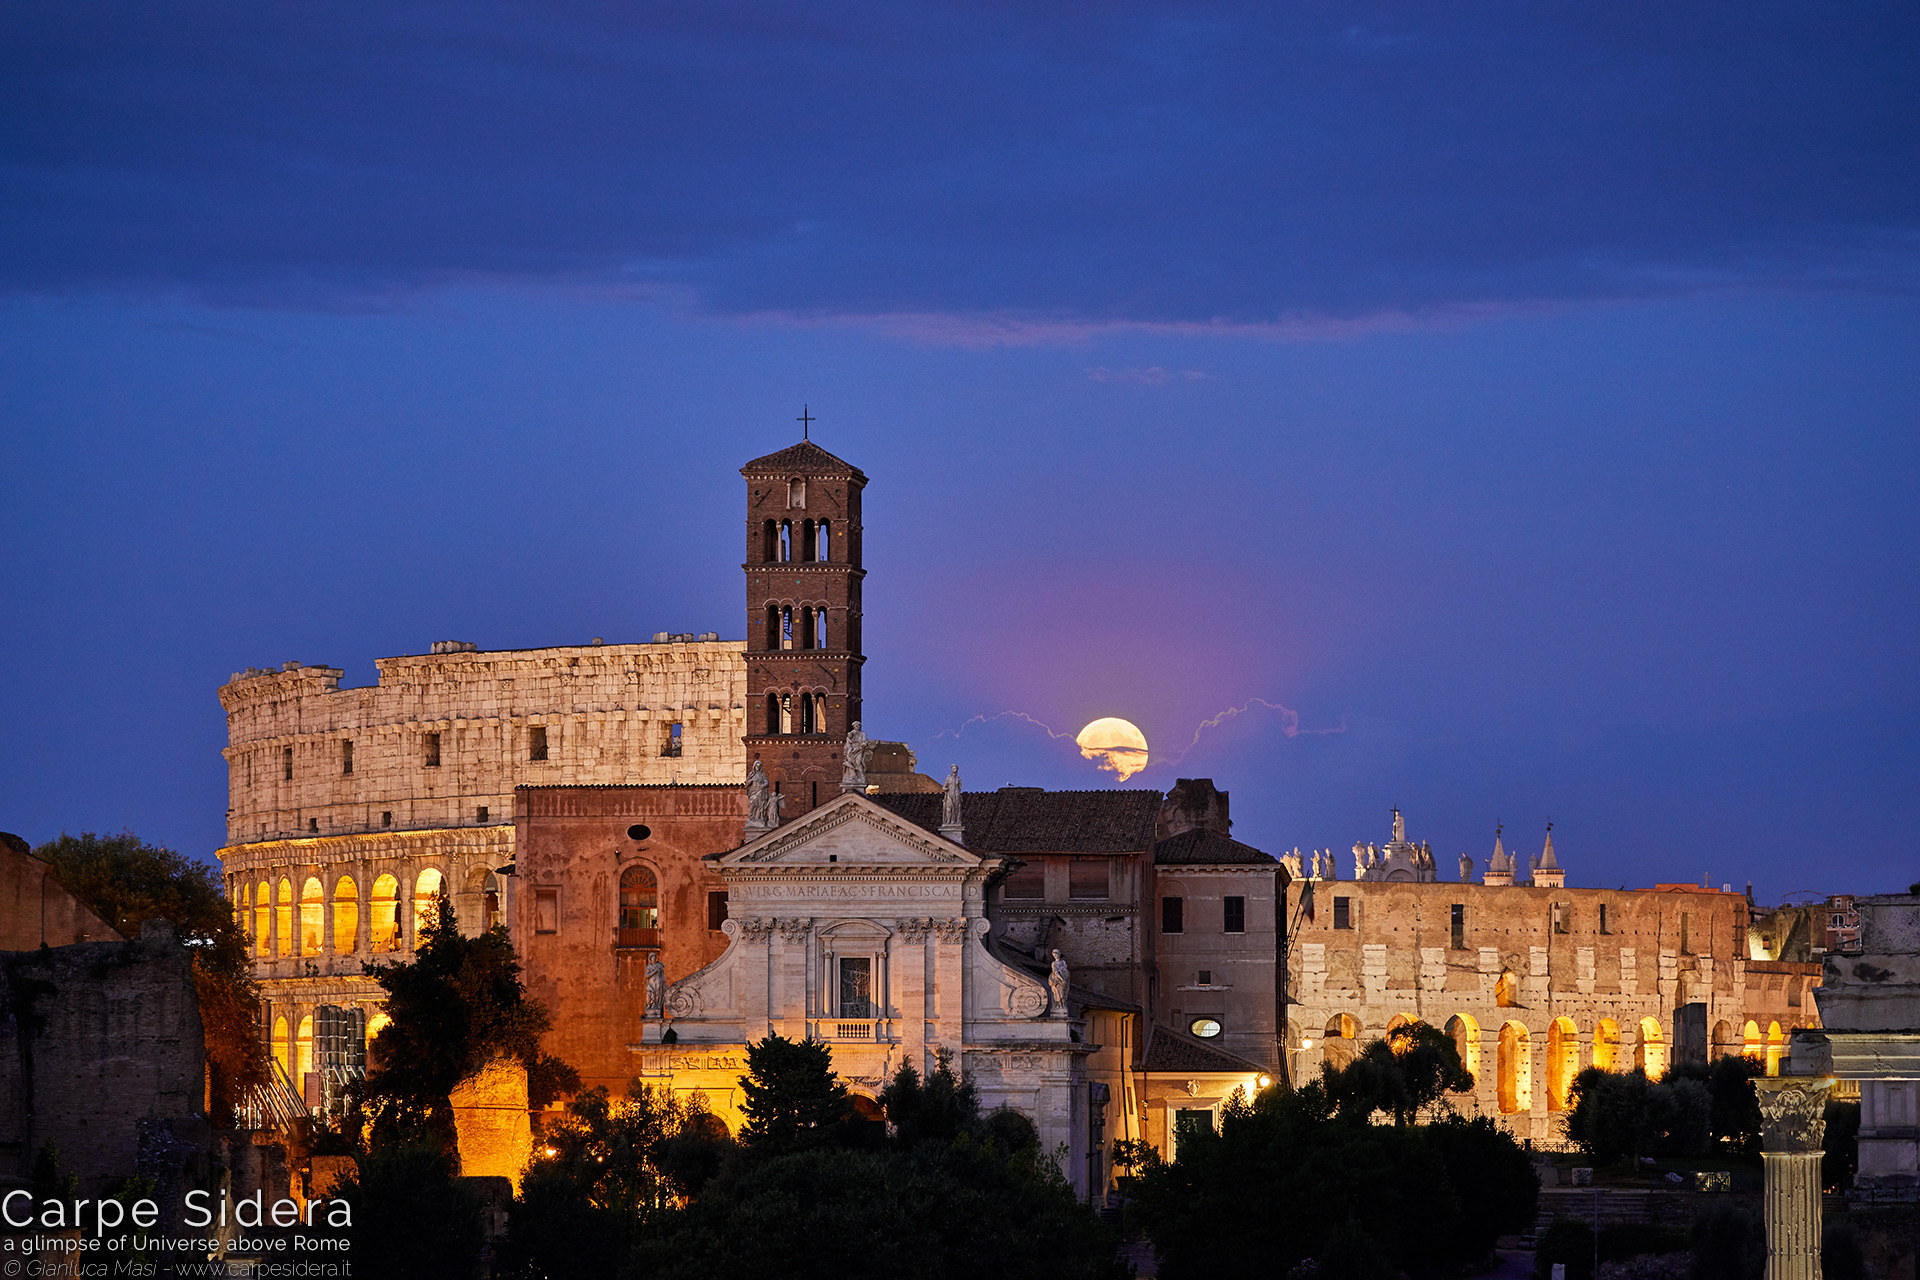 4. The full Moon rises behind the Flavian Amphitheatre.